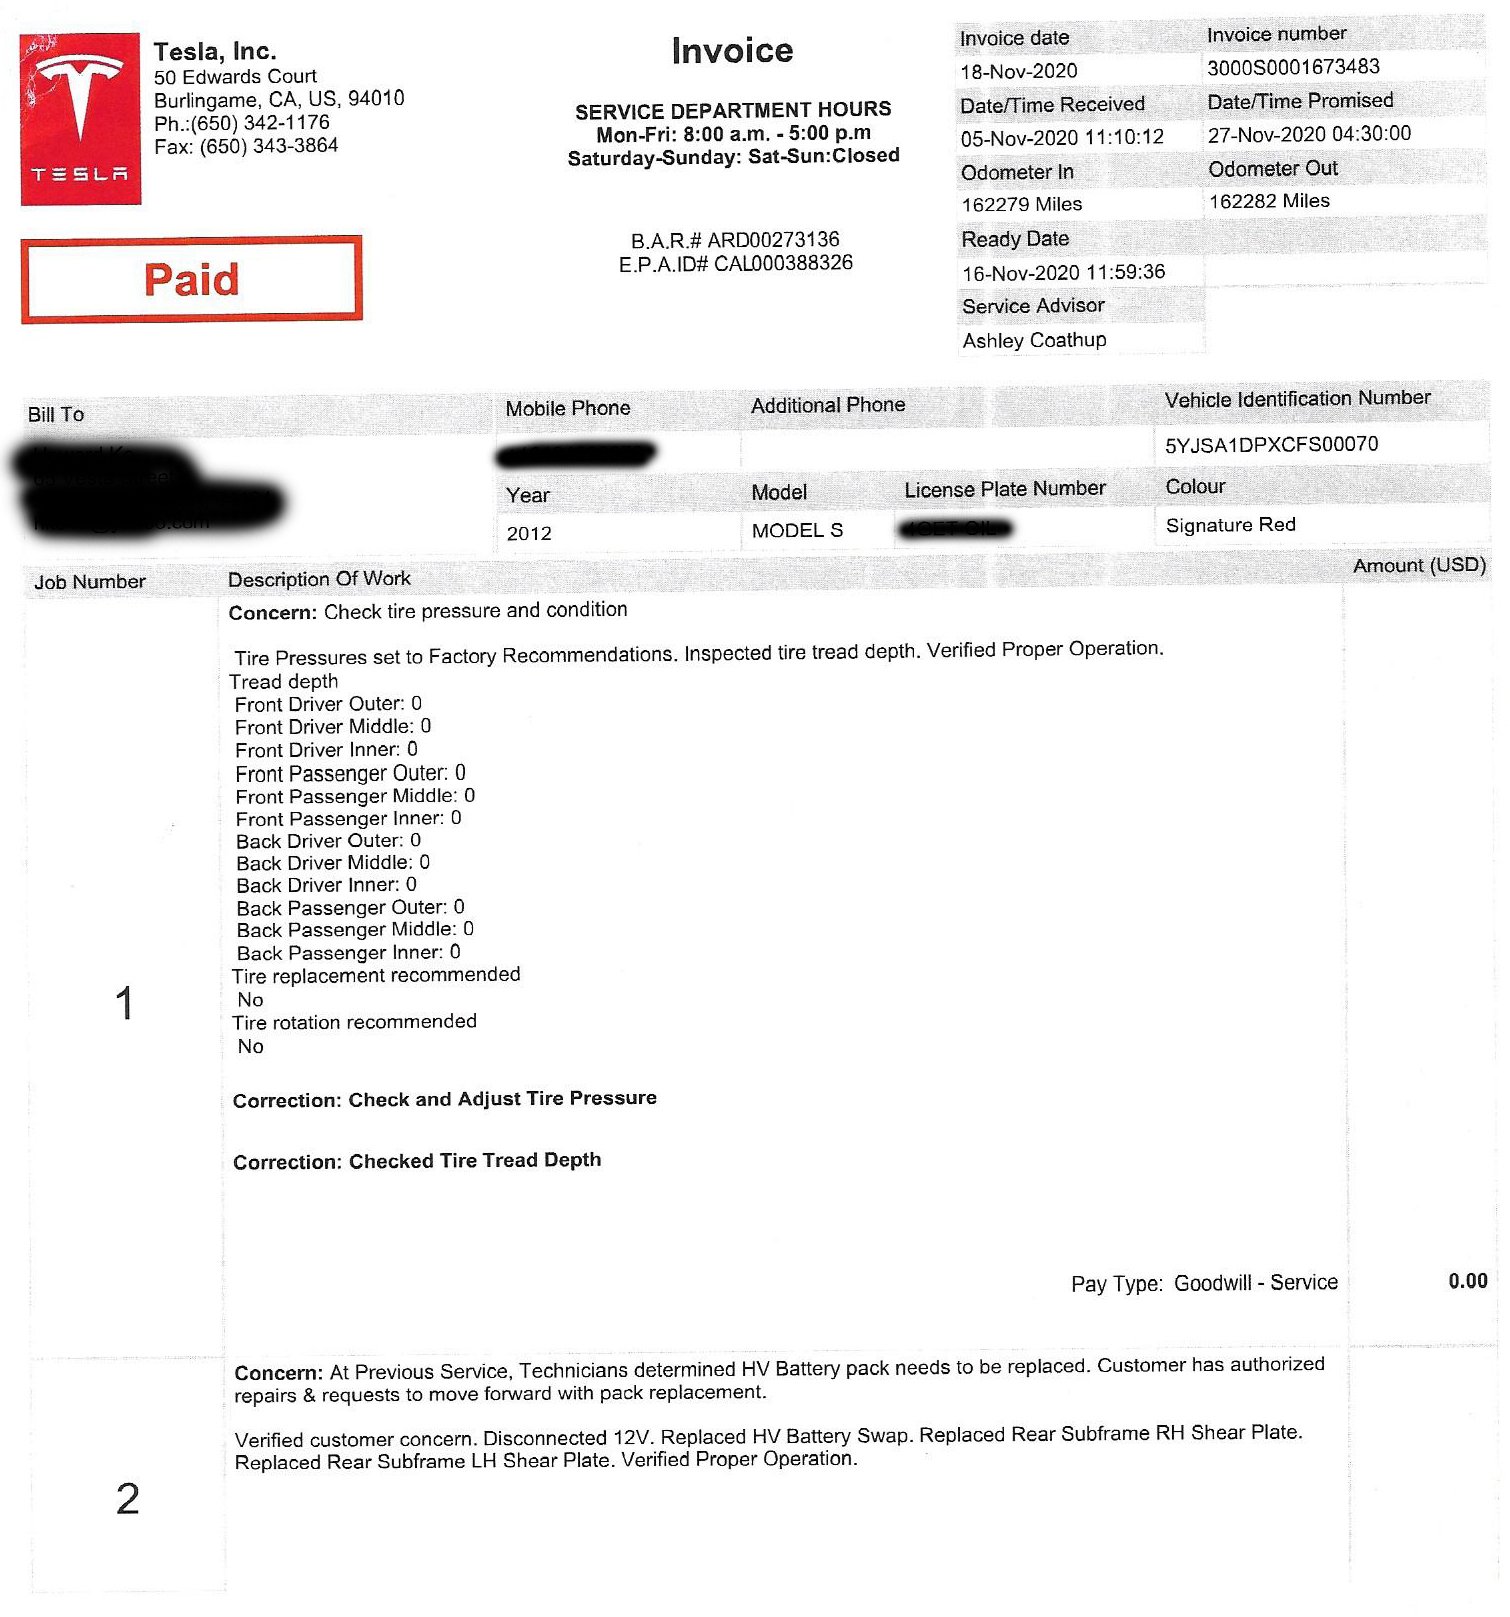 2012 Model S P85 Battery Replacement Receipt - sharing is caring | Tesla  Motors Club